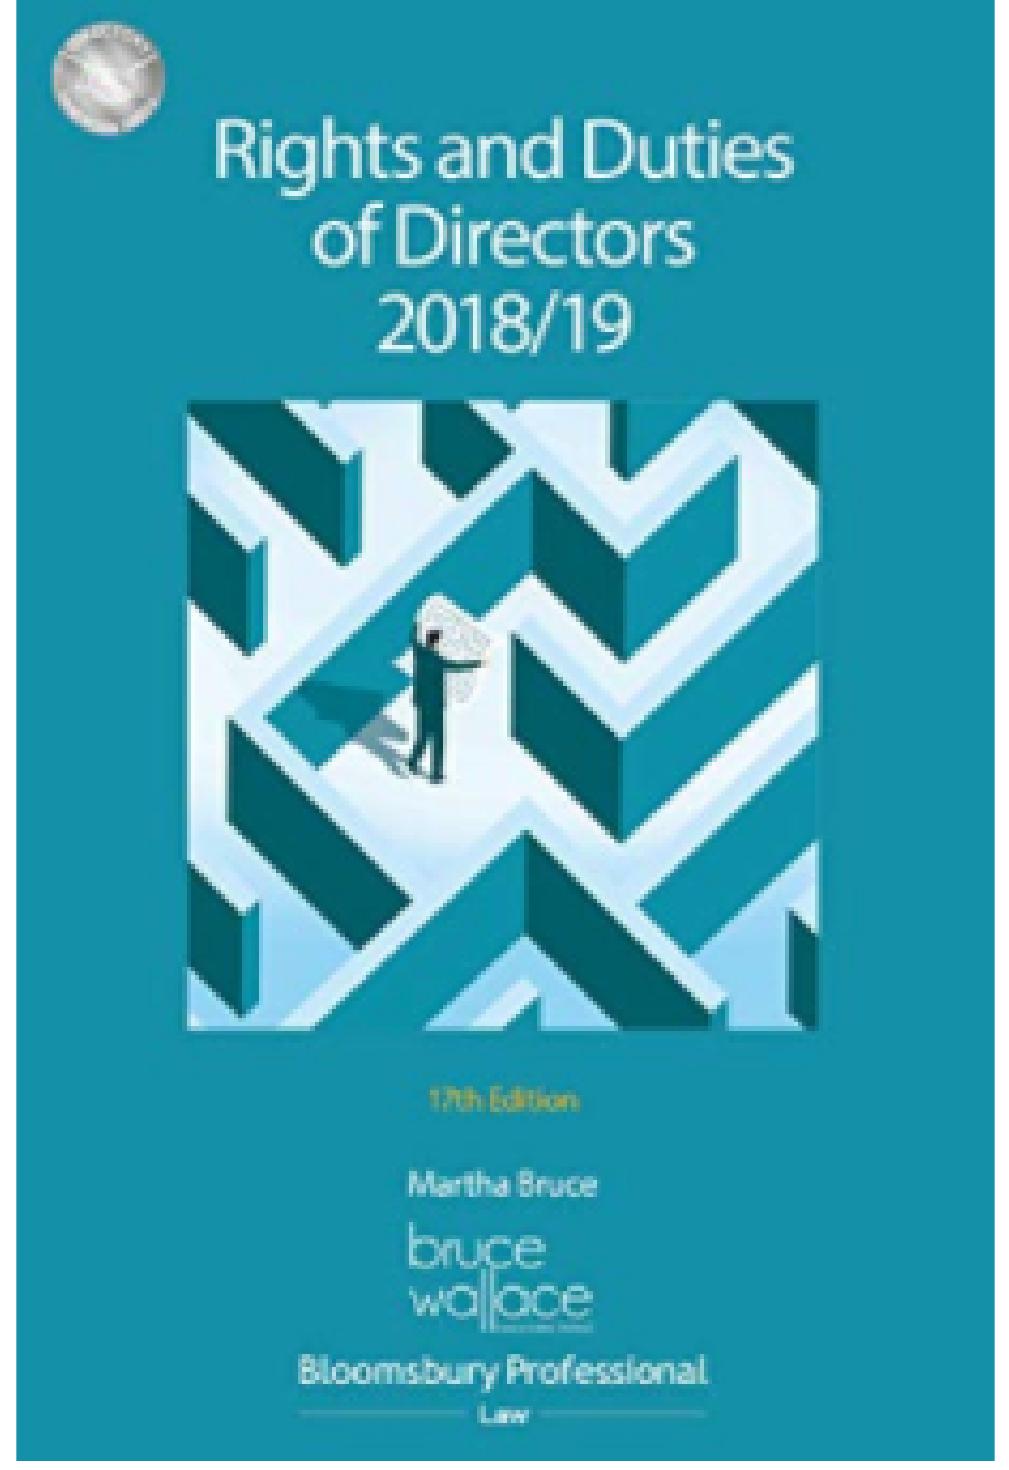 Rights and Duties of Directors 2018/19: 17th Edition (Directors Handbook Series) 17th Edition by Martha Bruce 